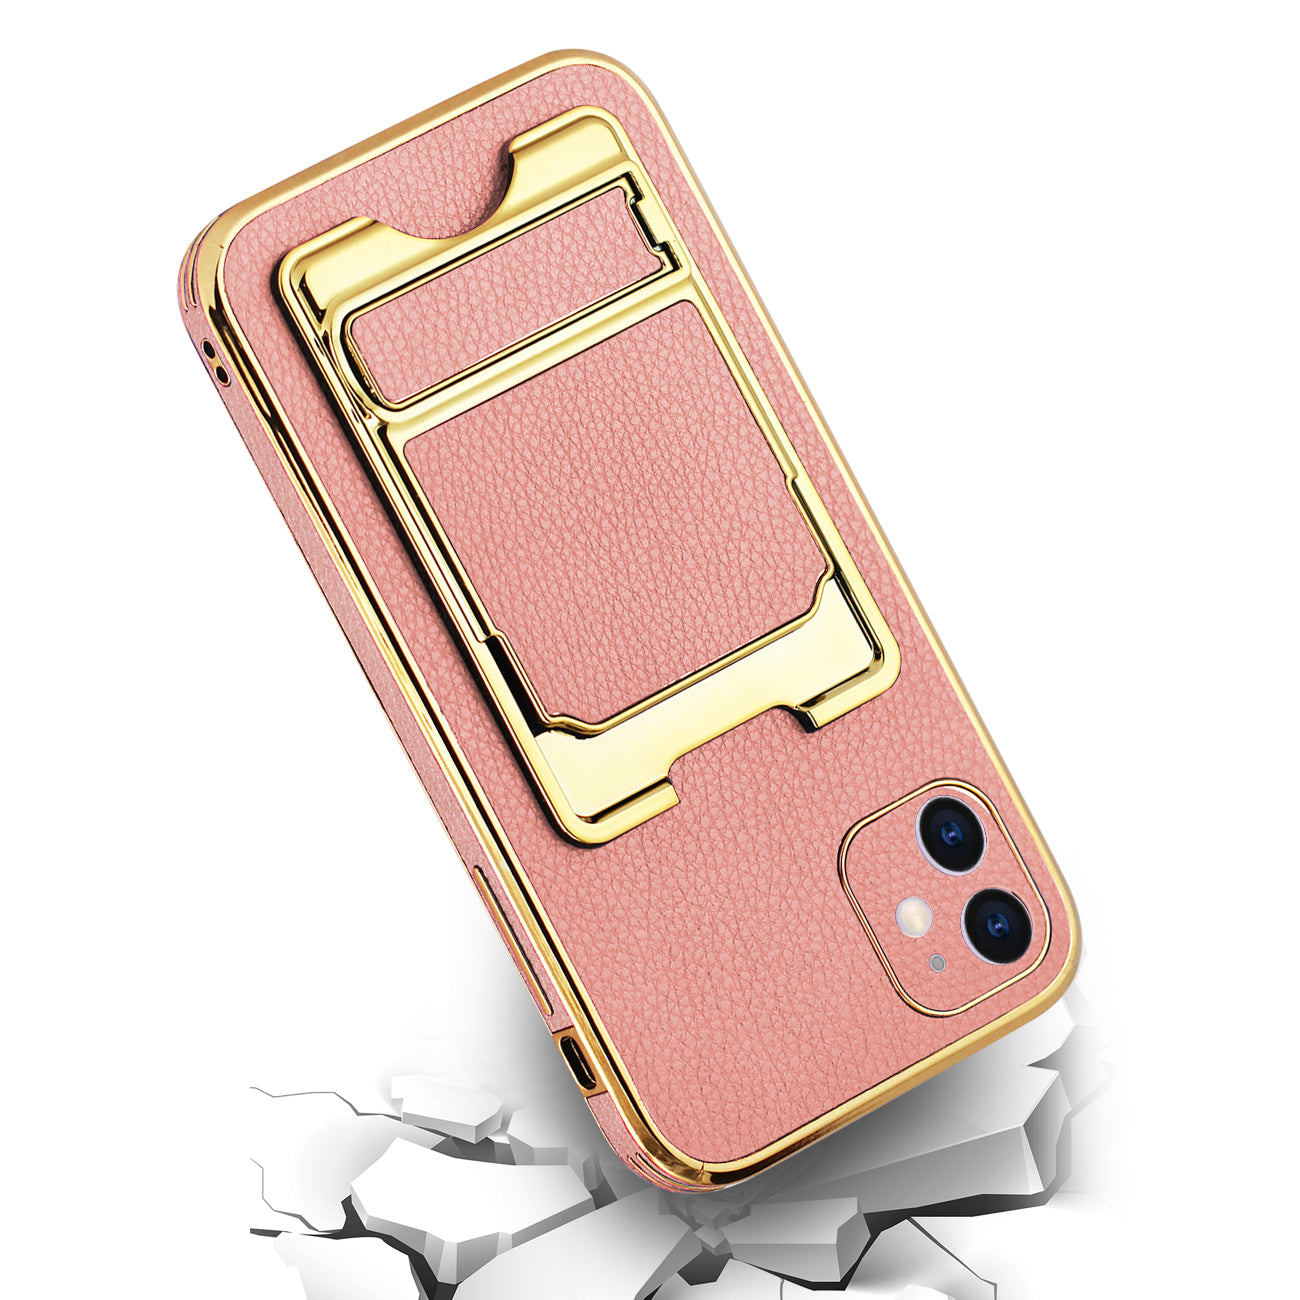 IPHONE 11 Leather Case with Card Holder In Pink